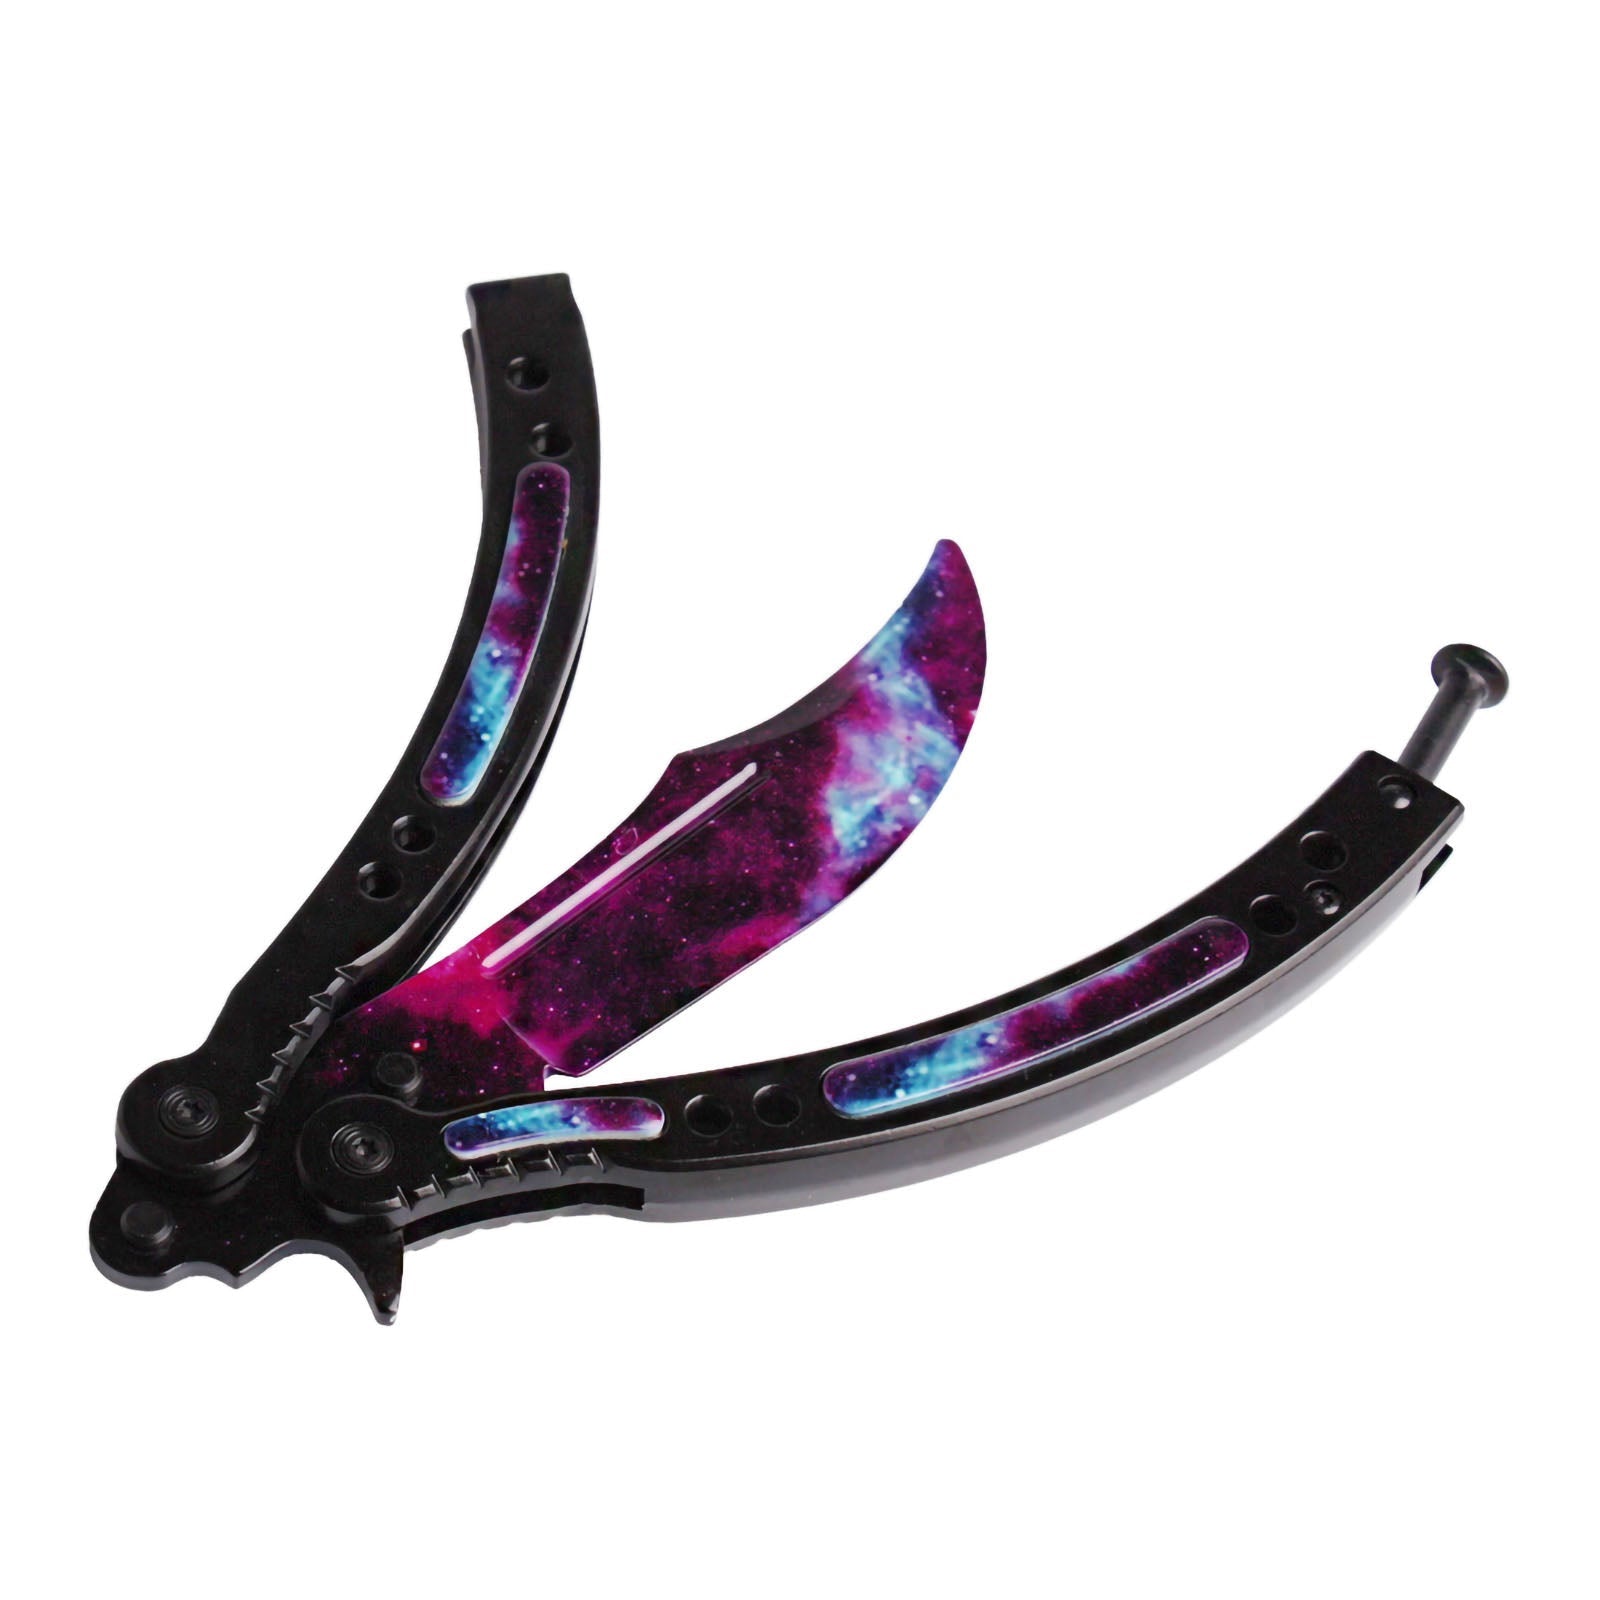 Andux Balisong Practice Trainer Curved Blade CS/HDD13 (Purple)(ONLY Available in EU Countries)